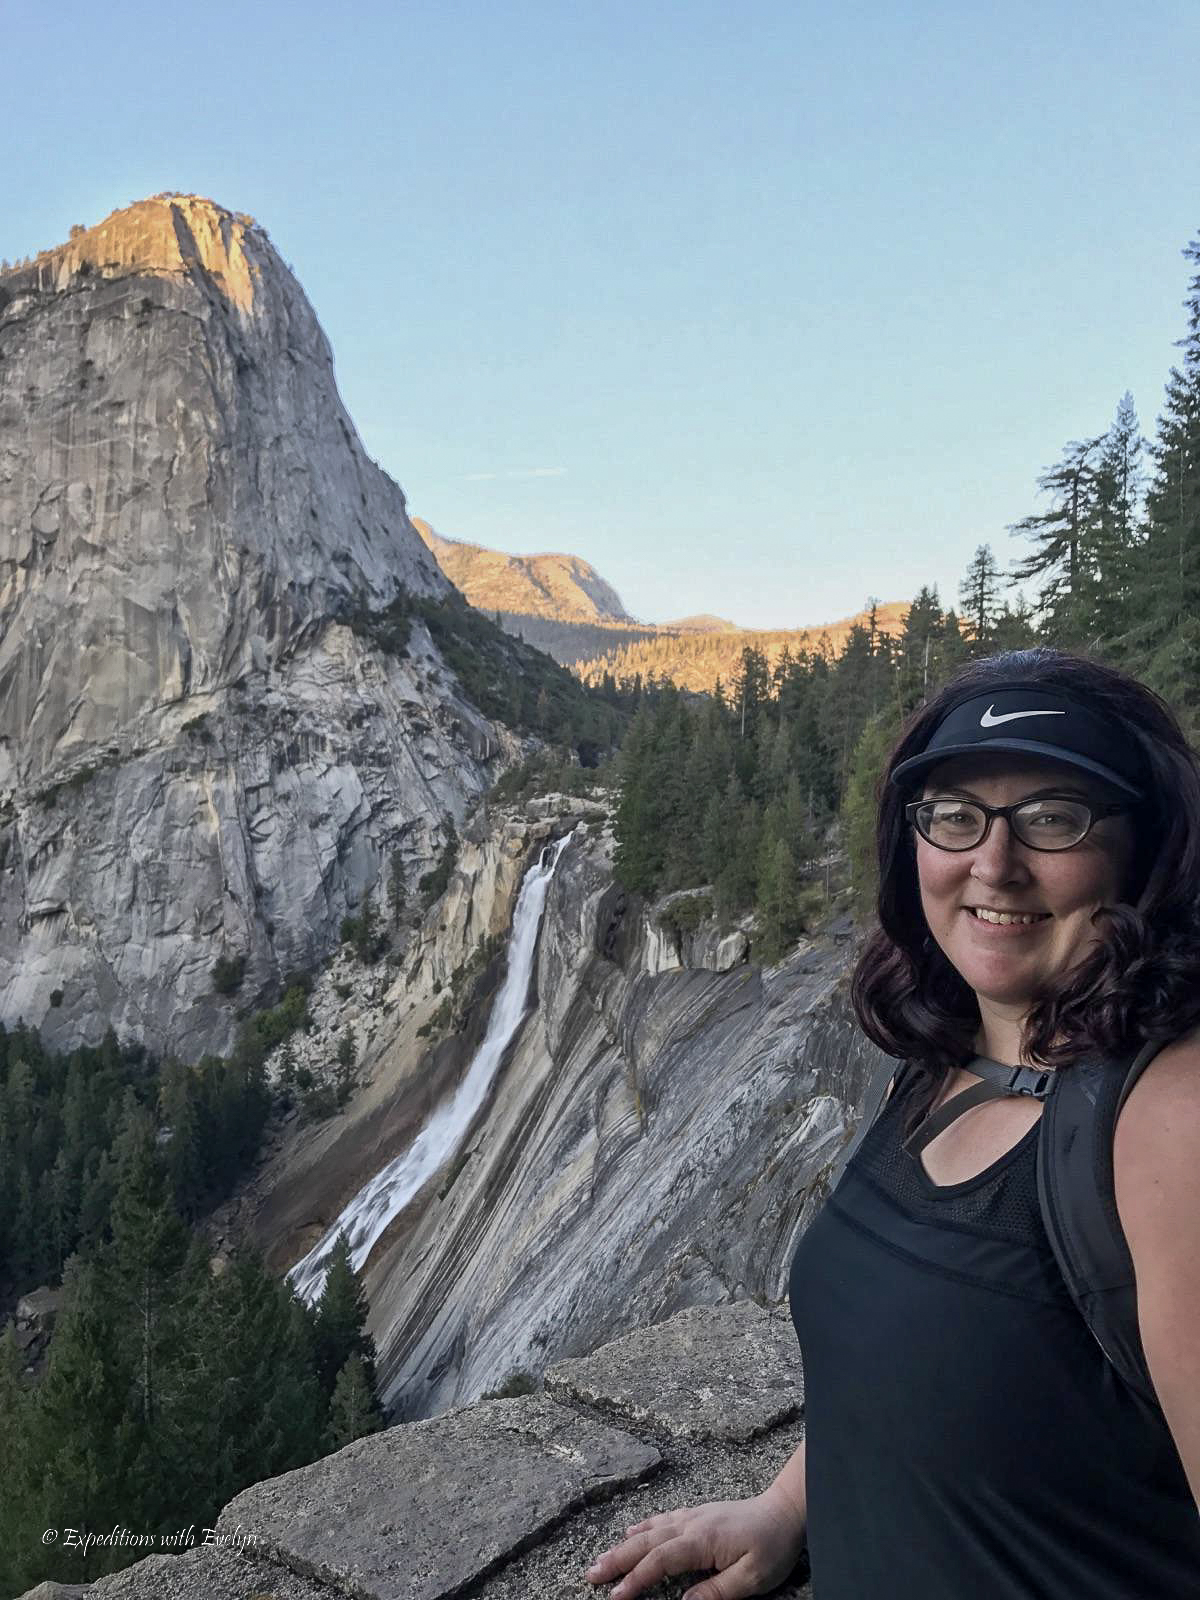 A female hiker in a black visor and black shirt smiles with a waterfall and domed mountain in the background in the fading light.